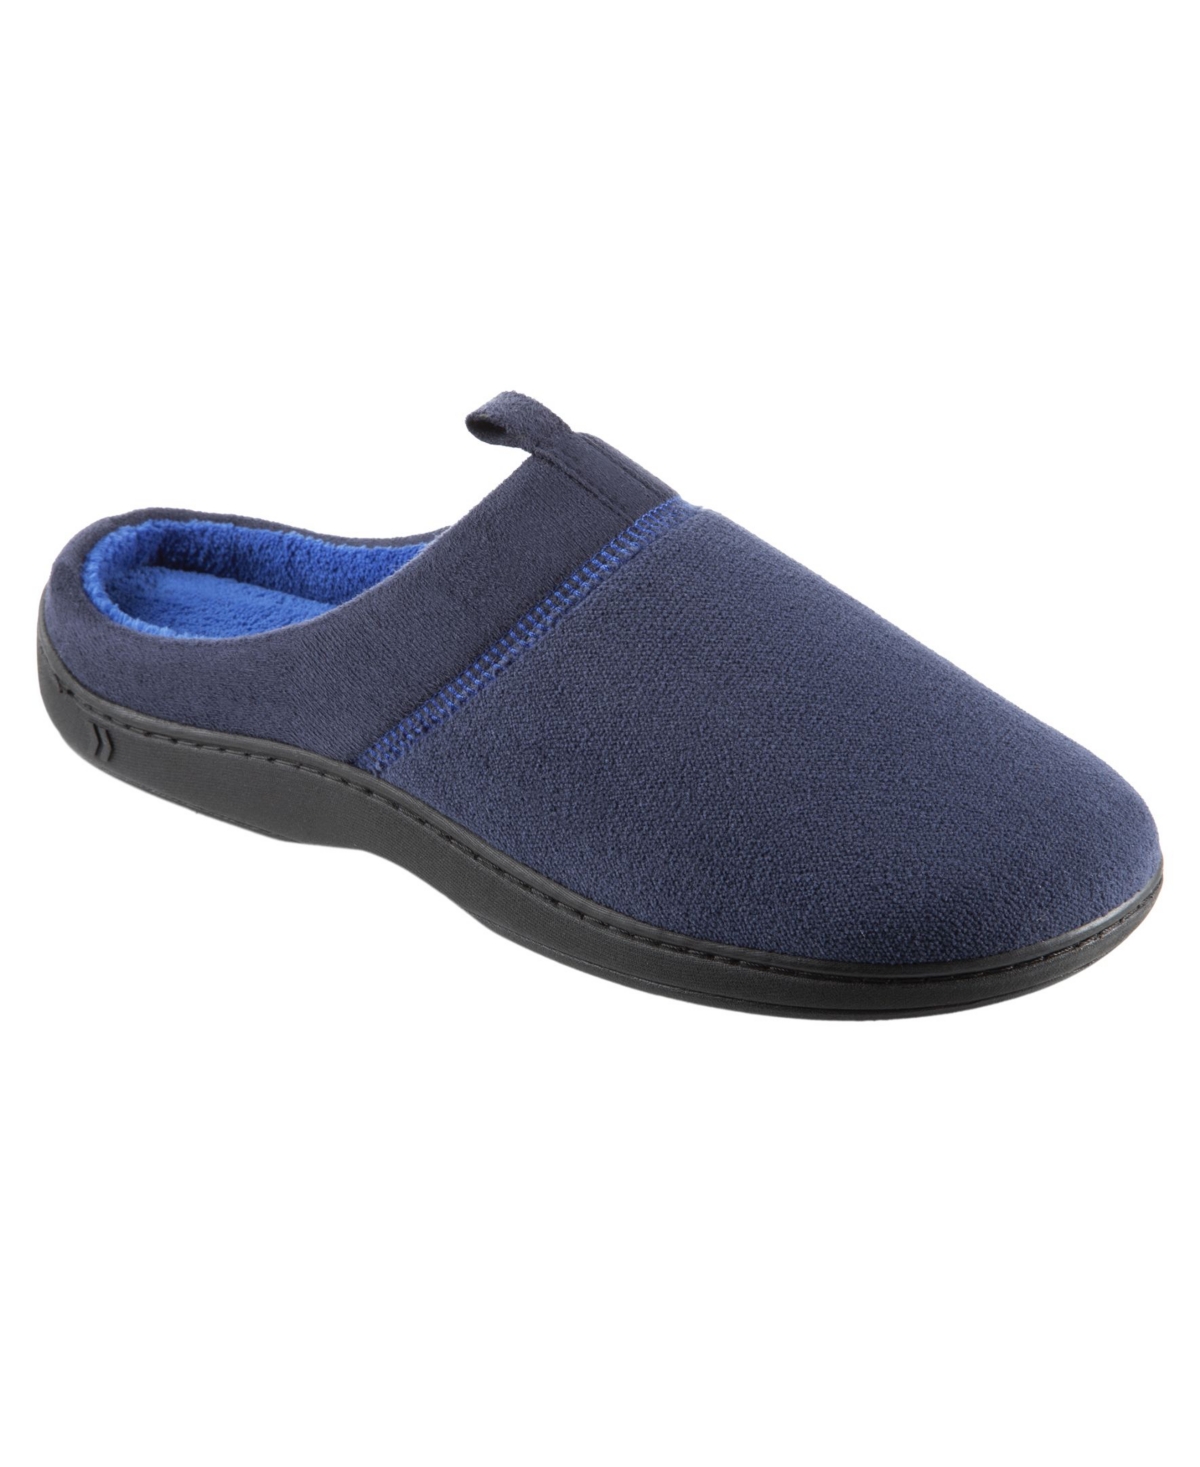 Men's Microterry Jared Hoodback Slippers - Navy Blue